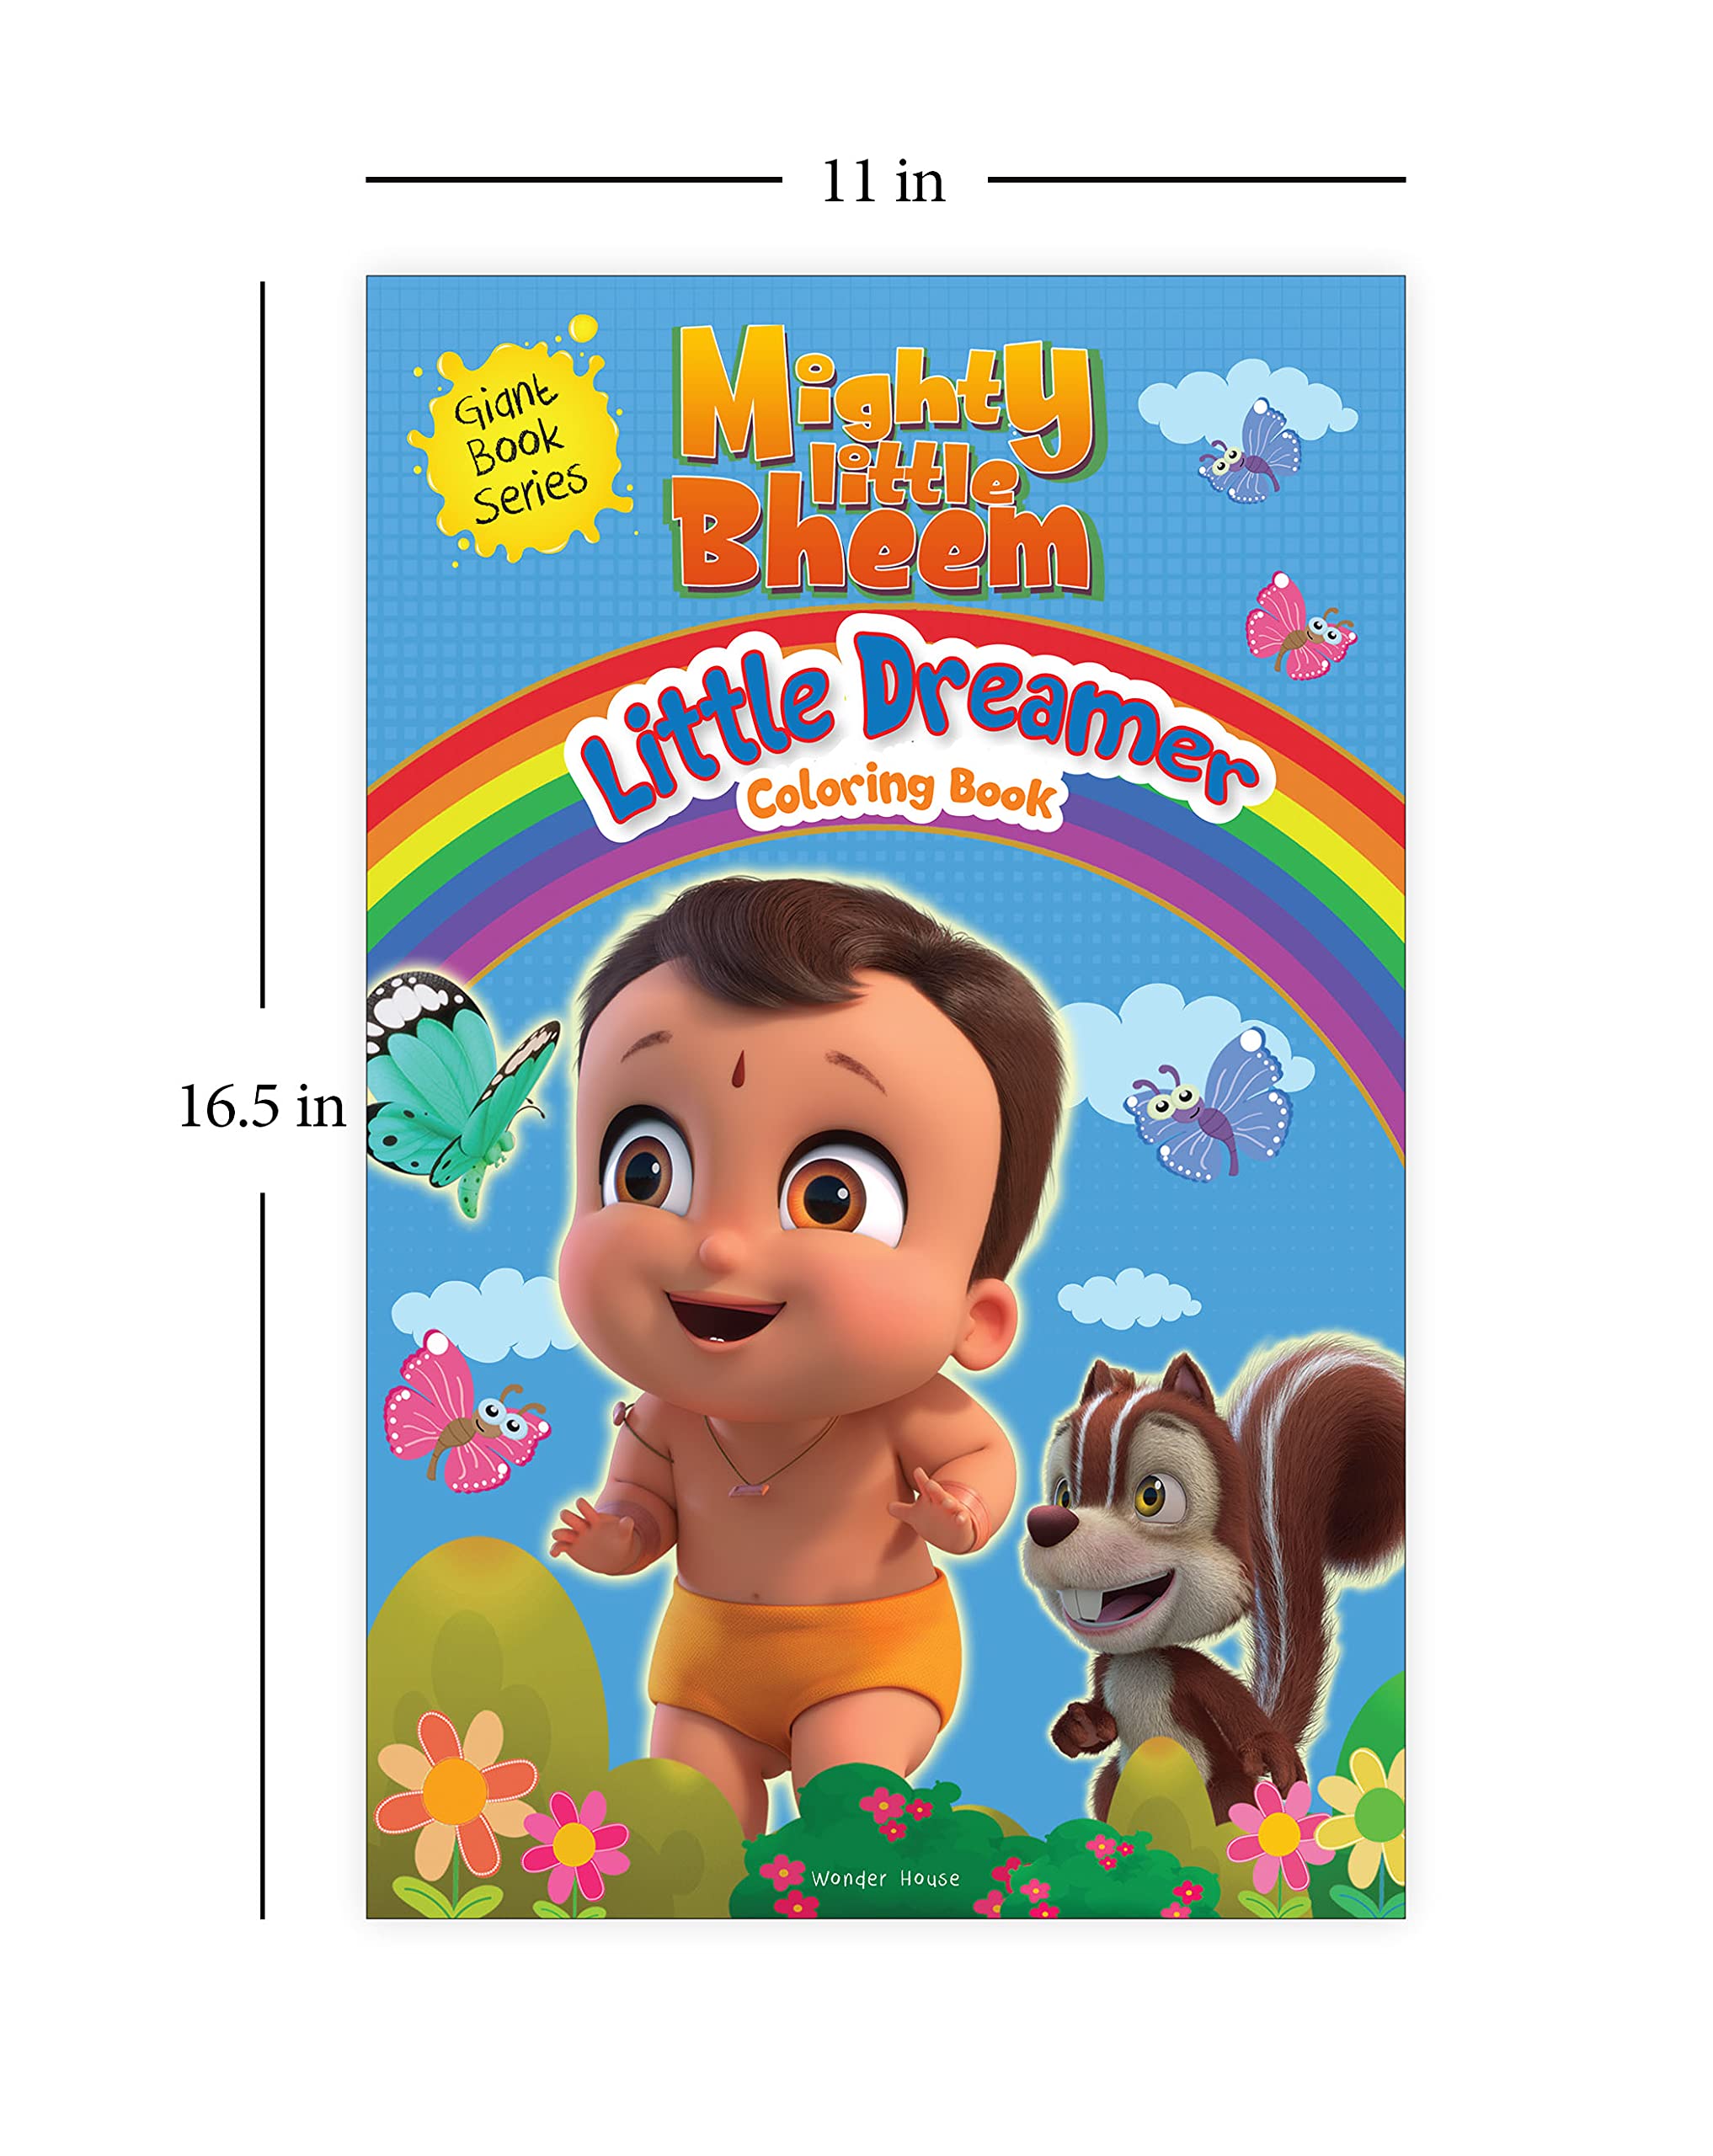 Mighty Little Bheem - Little Dreamer Coloring Book : Giant Book Series